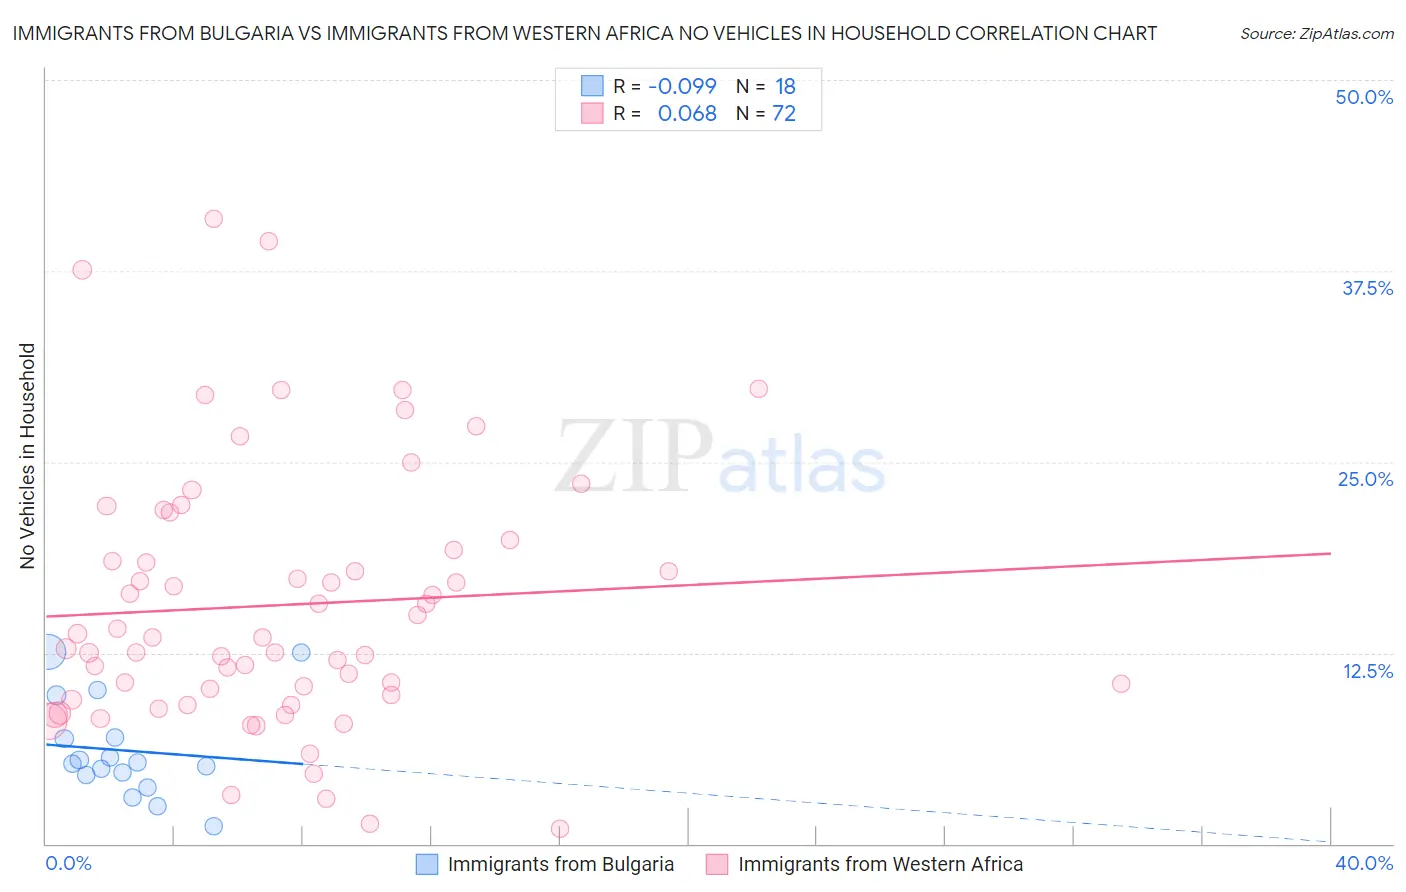 Immigrants from Bulgaria vs Immigrants from Western Africa No Vehicles in Household